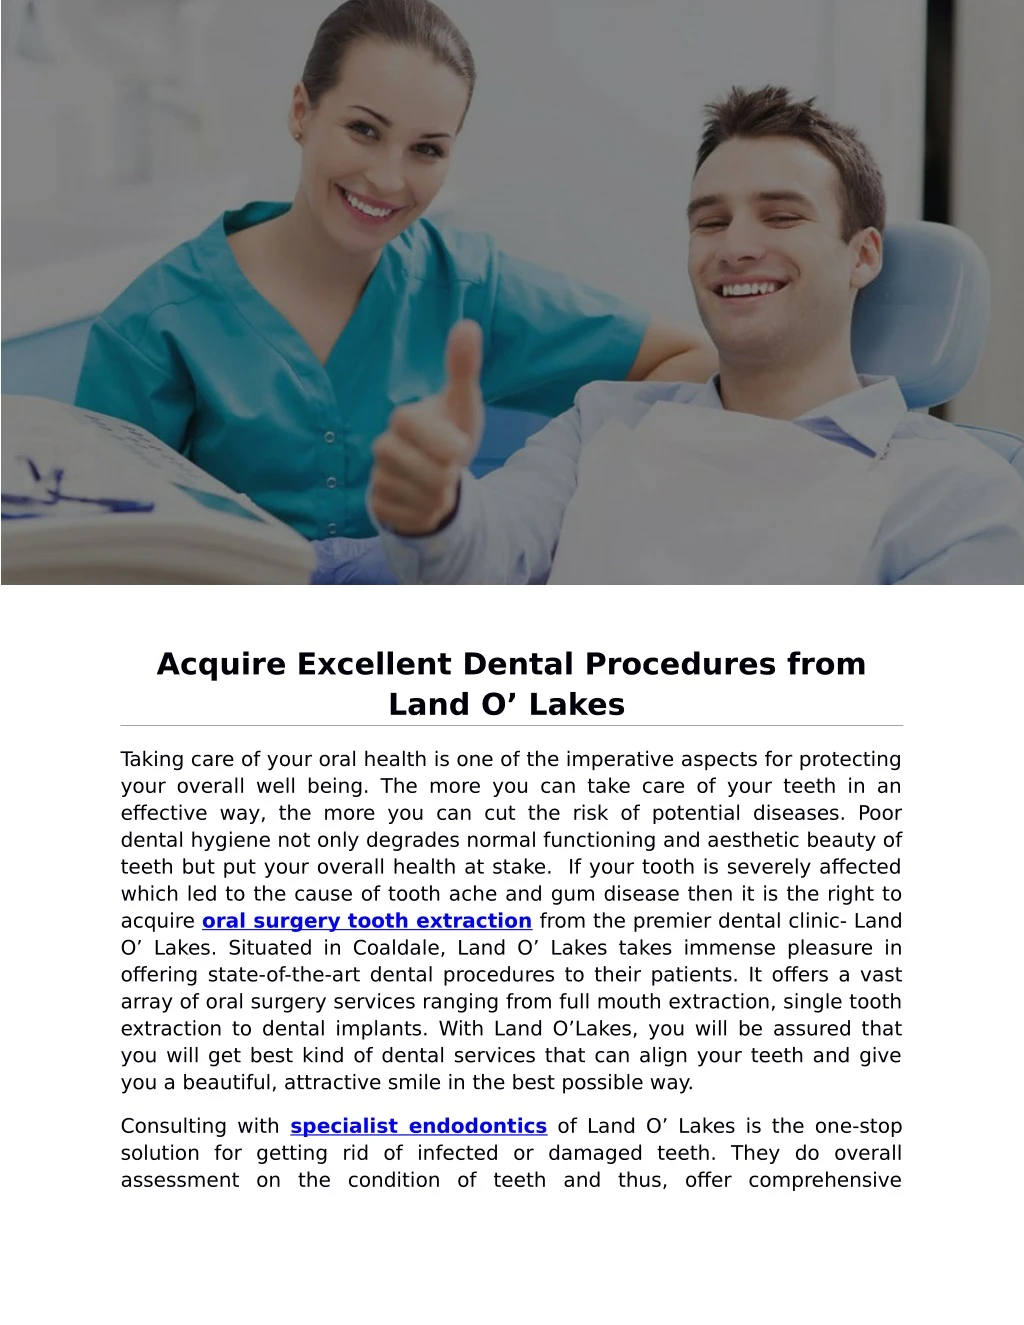 acquire excellent dental procedures from land